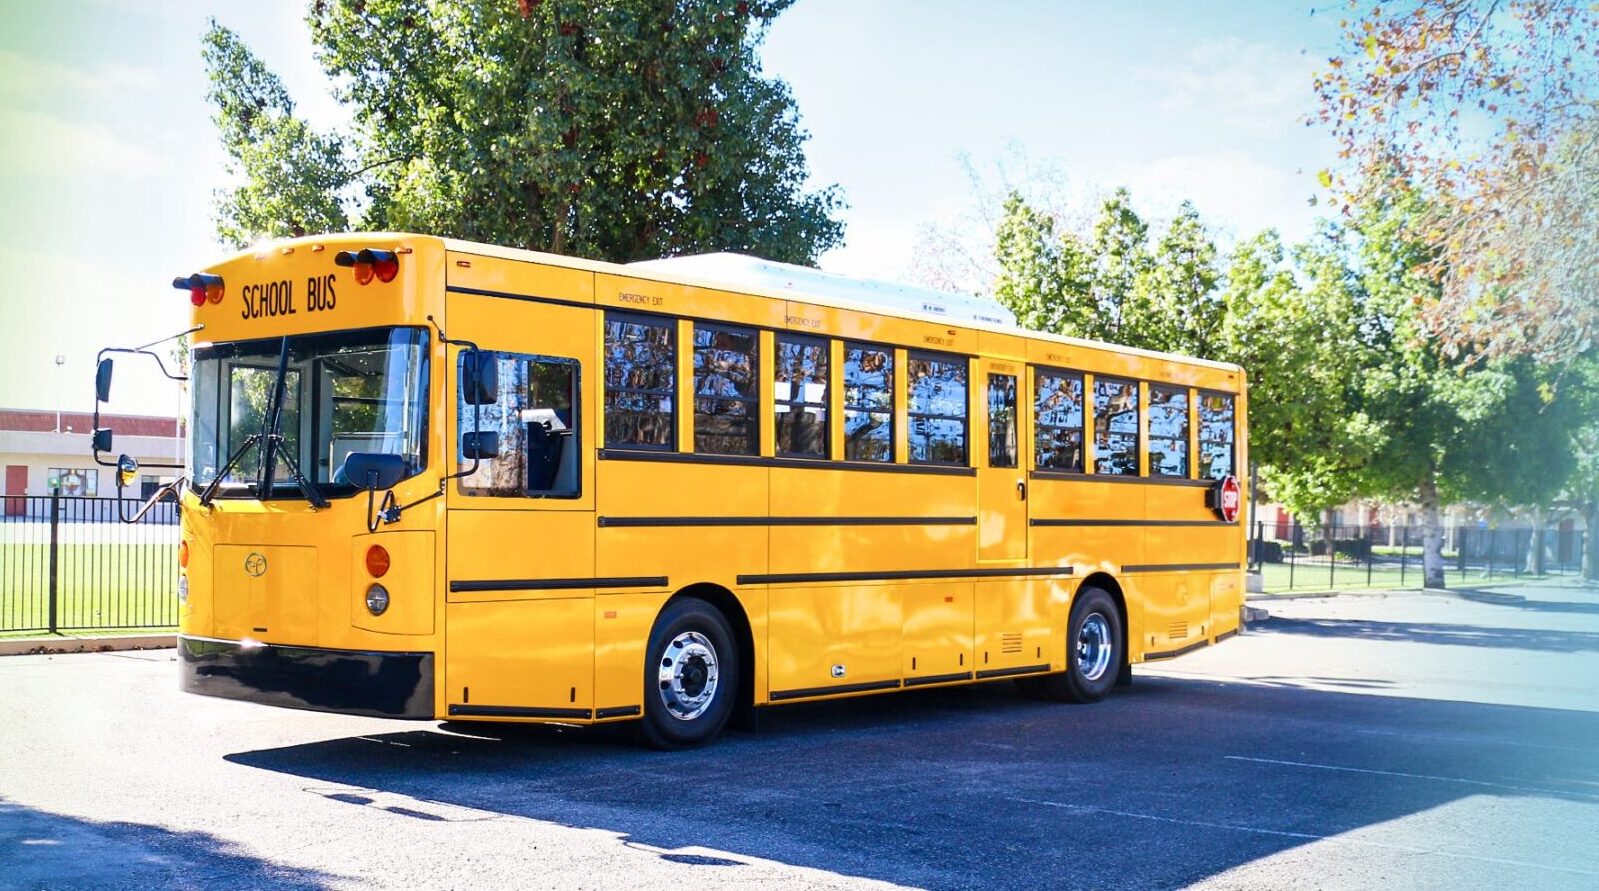 GreenPower Delivers 1st BEAST Electric Bus Order of 37 BEASTs to be Delivered in 2024 to School Districts in West Virginia